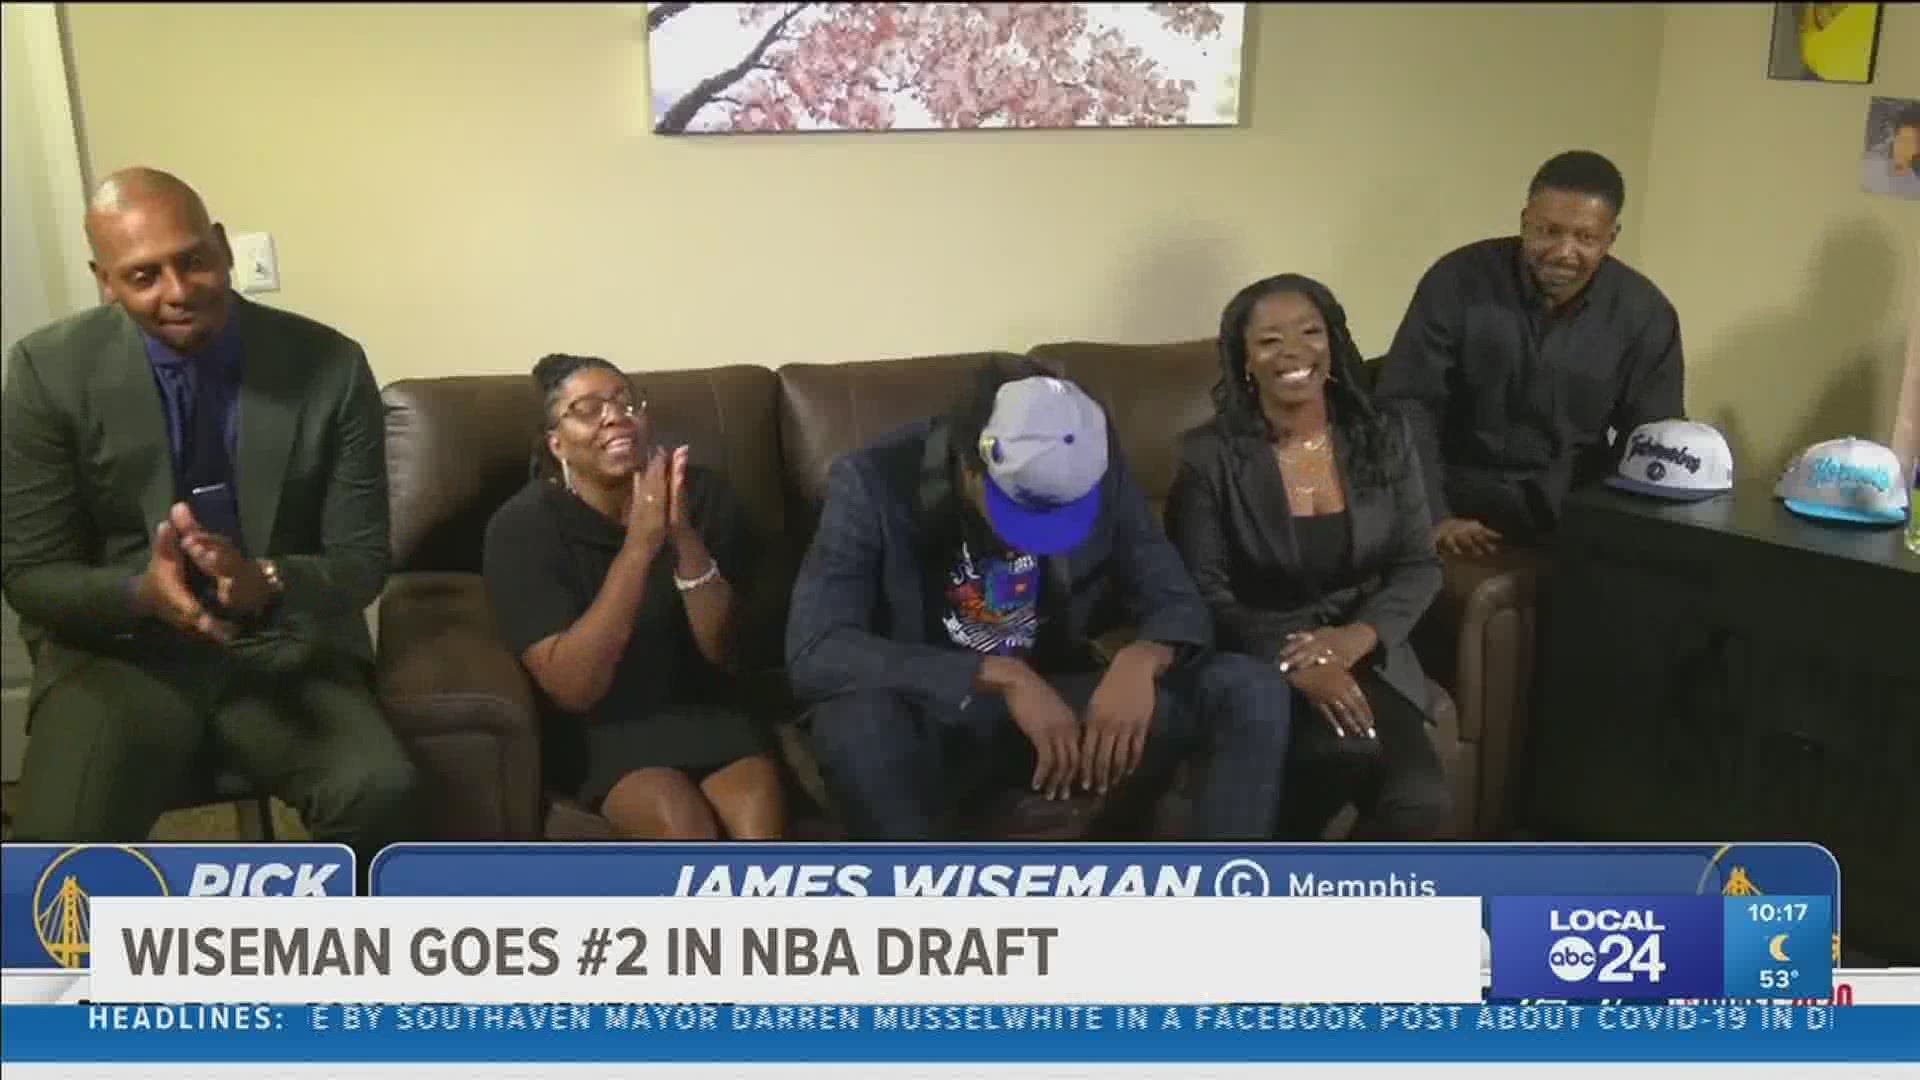 The Memphis Tigers basketball program is in the national spotlight once again, as former star player James Wiseman is selected in the 1st round of the 2020 NBA draft